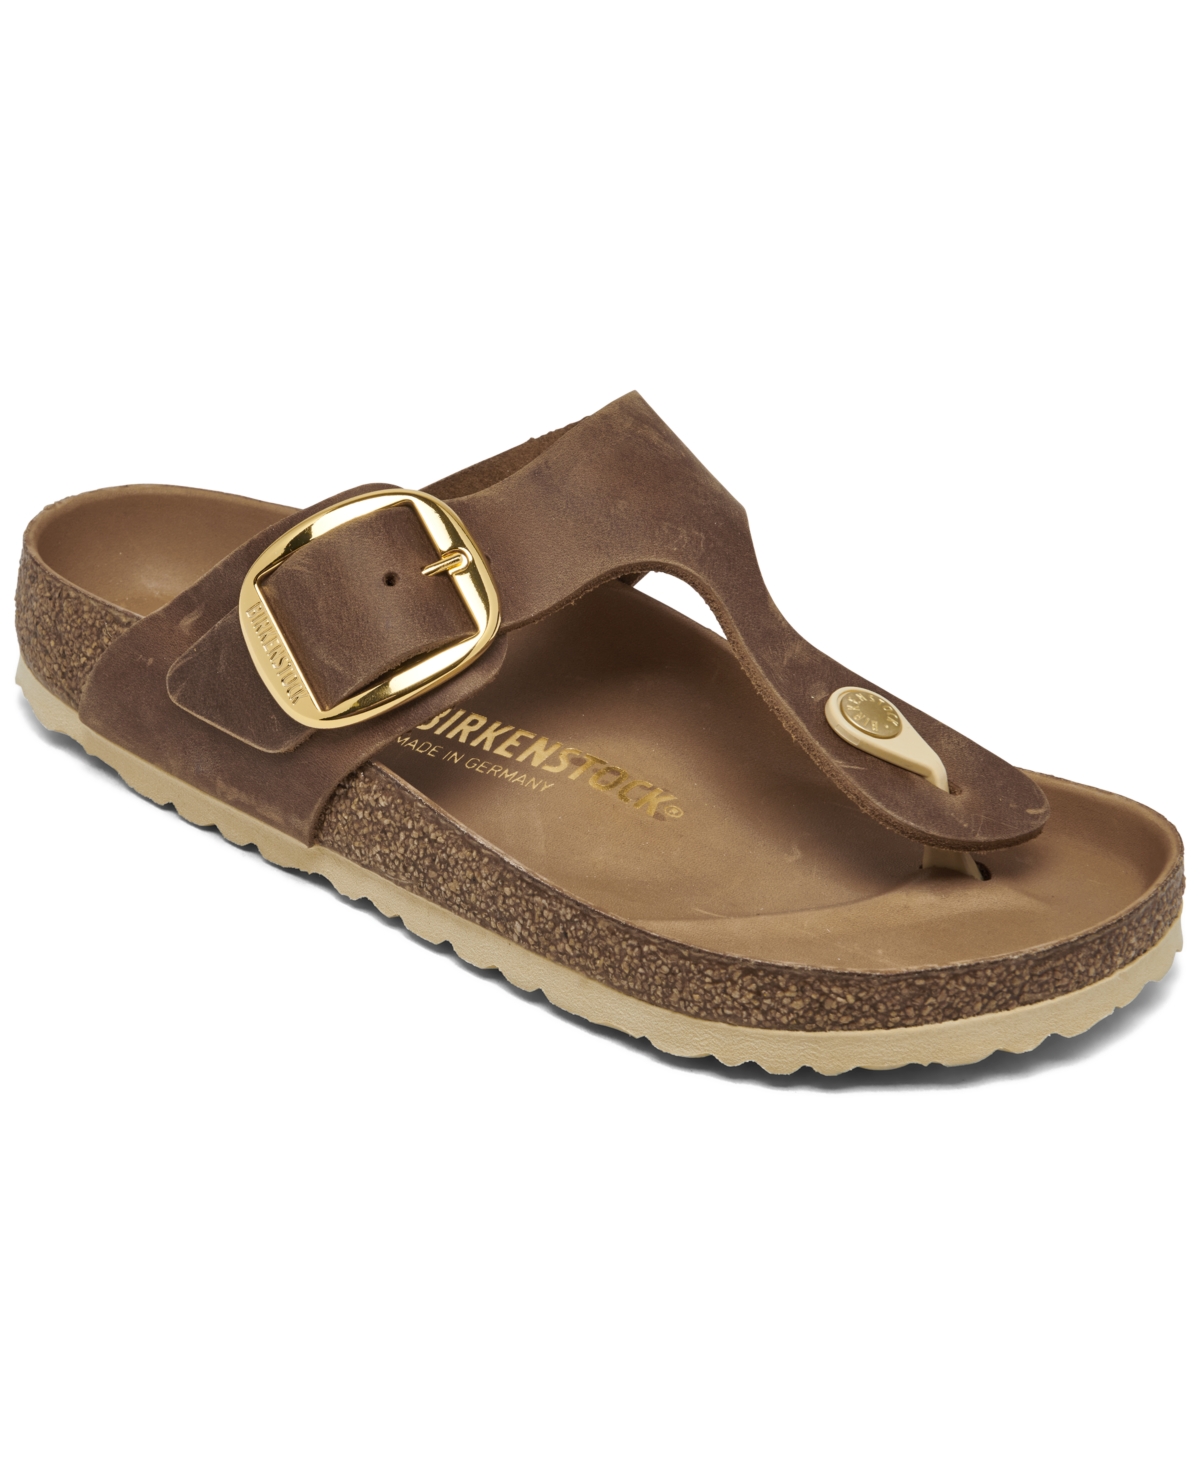 Women's Gizeh Big Buckle Oiled Leather Sandals from Finish Line - Cognac Brown